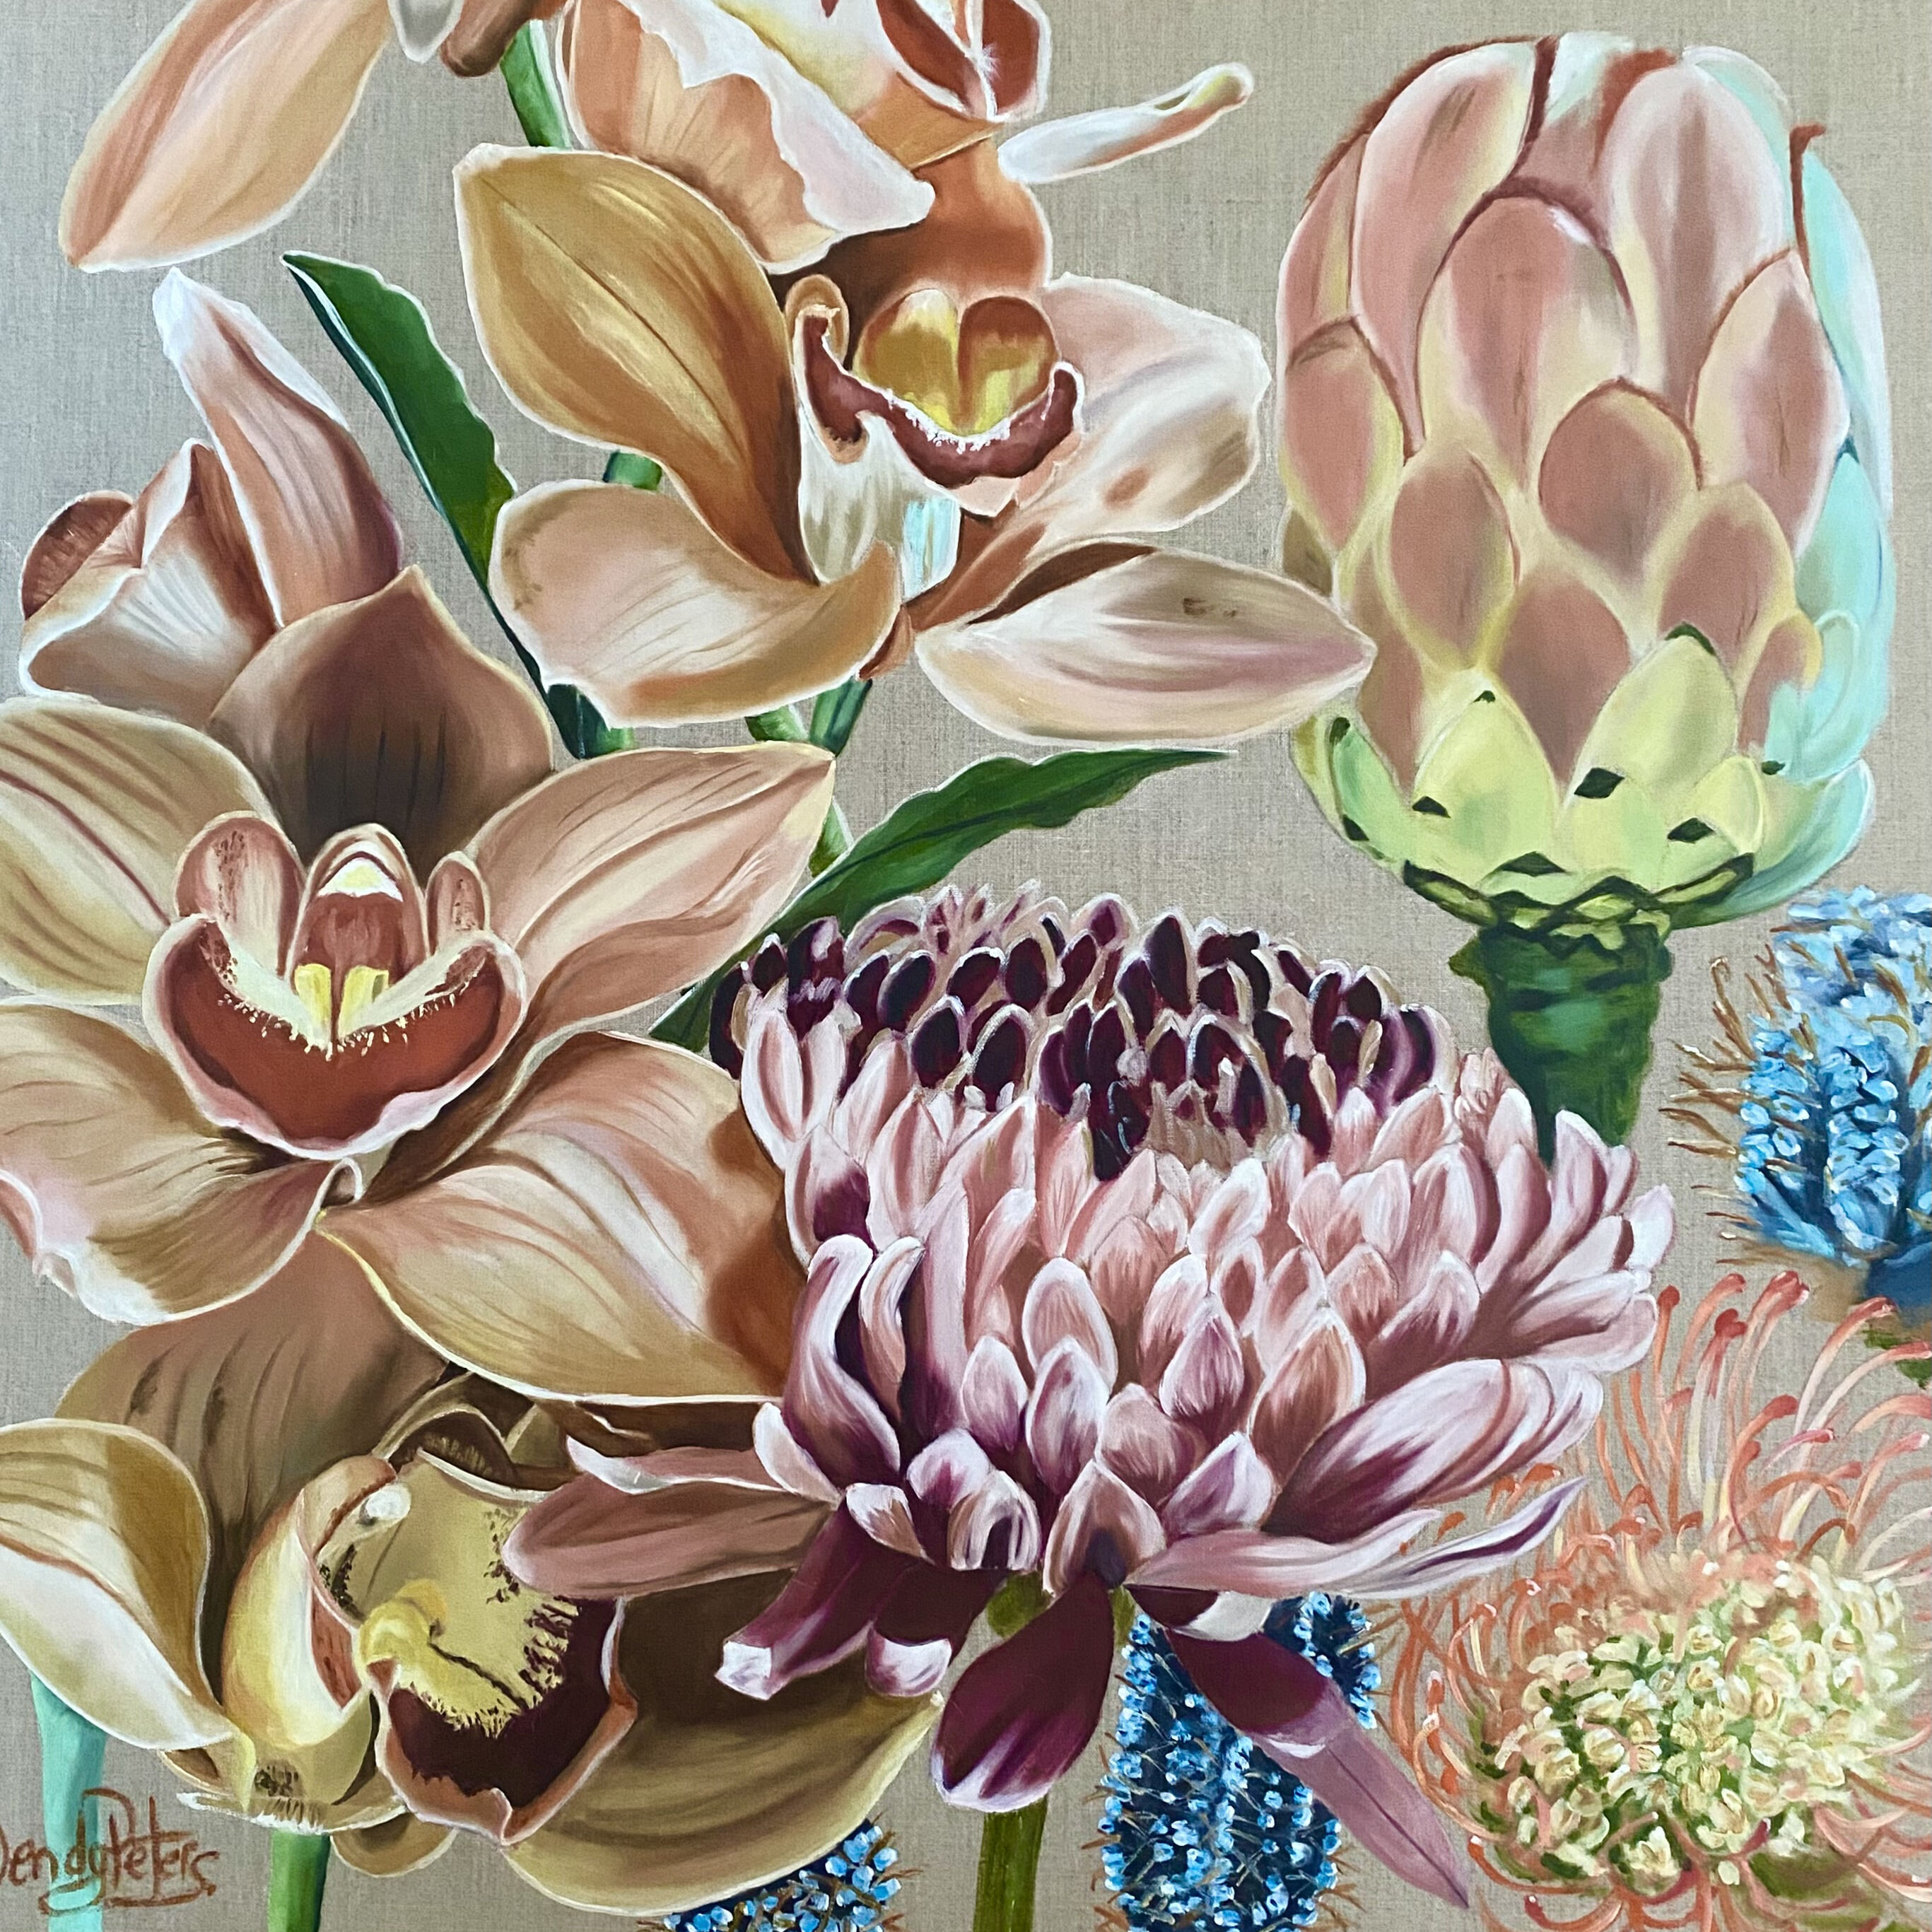 The Peachy Orchids_oil_76x76_Wendy_Peters